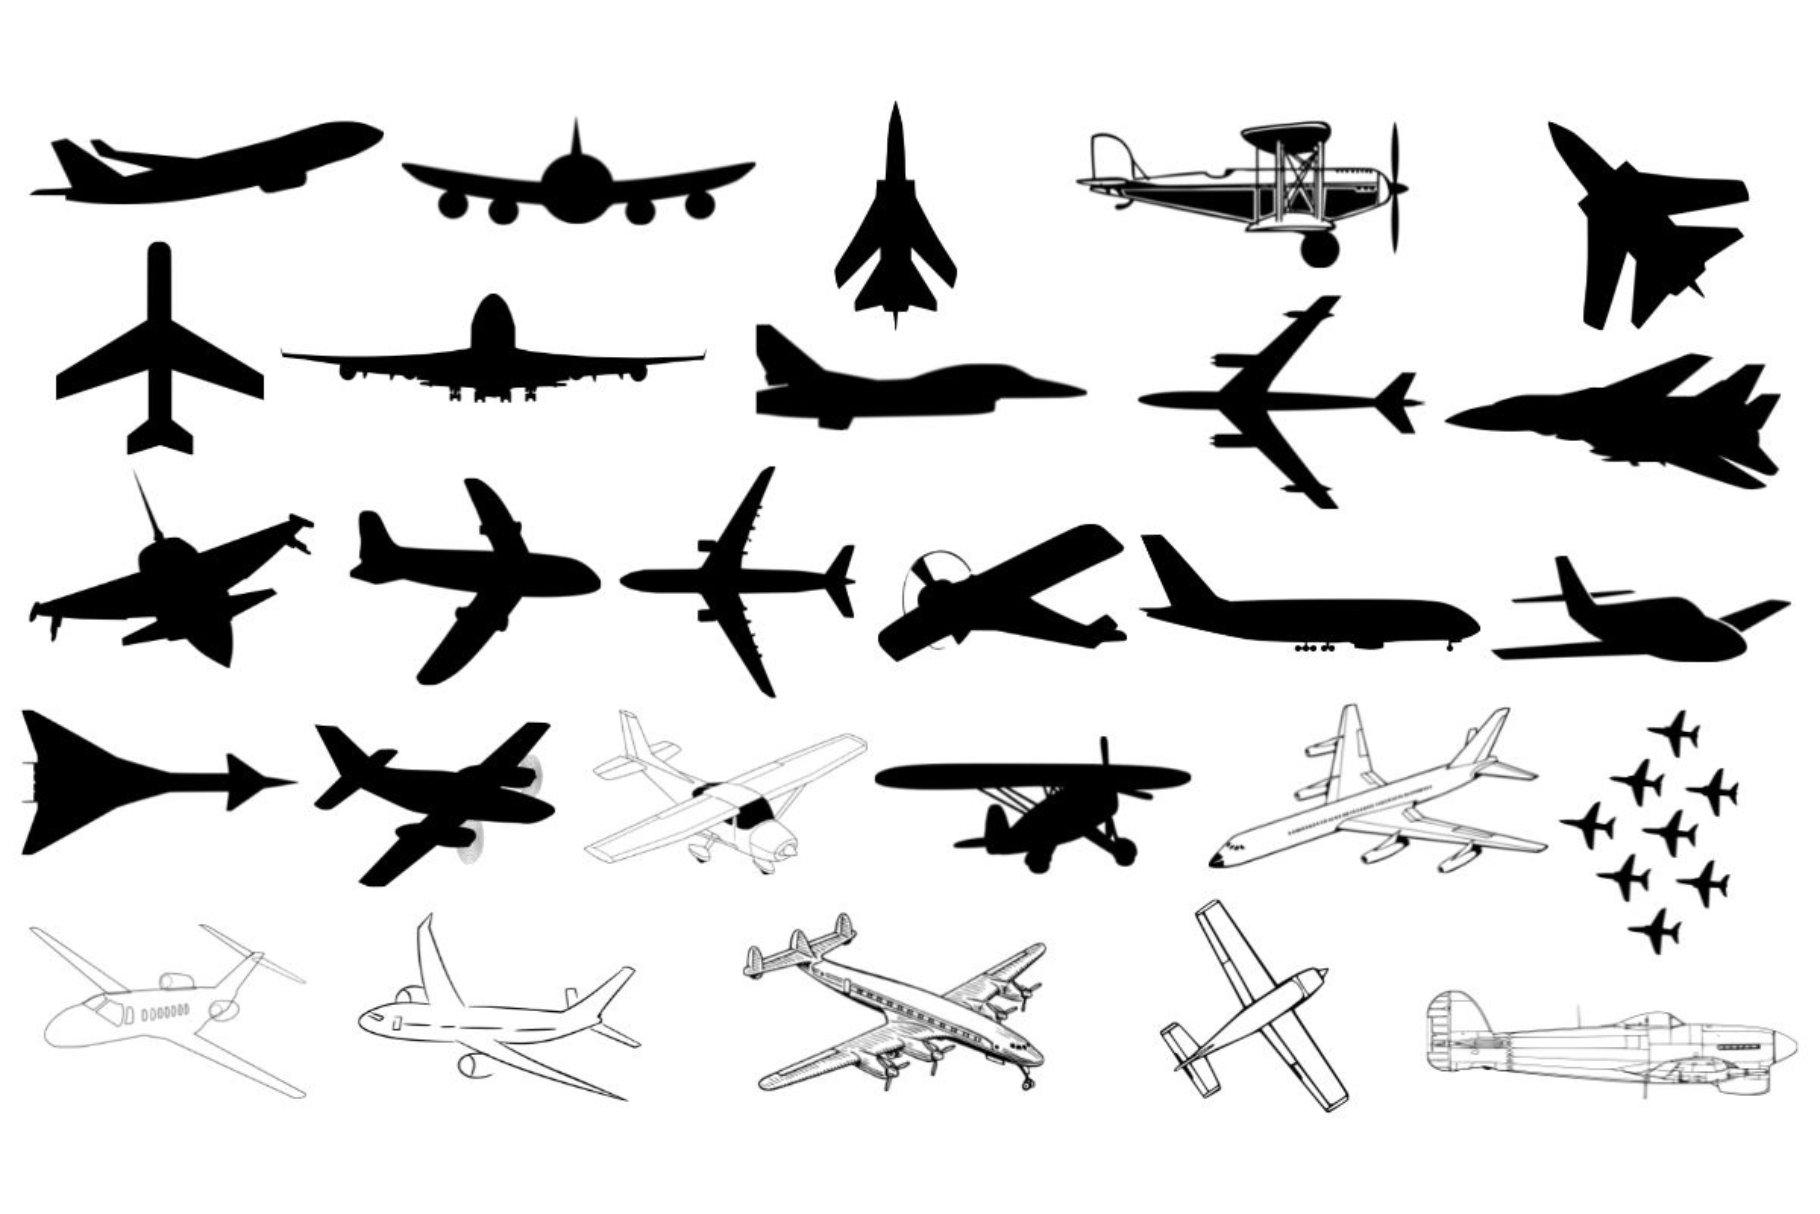 Airplane Silhouette Bundle cover image.